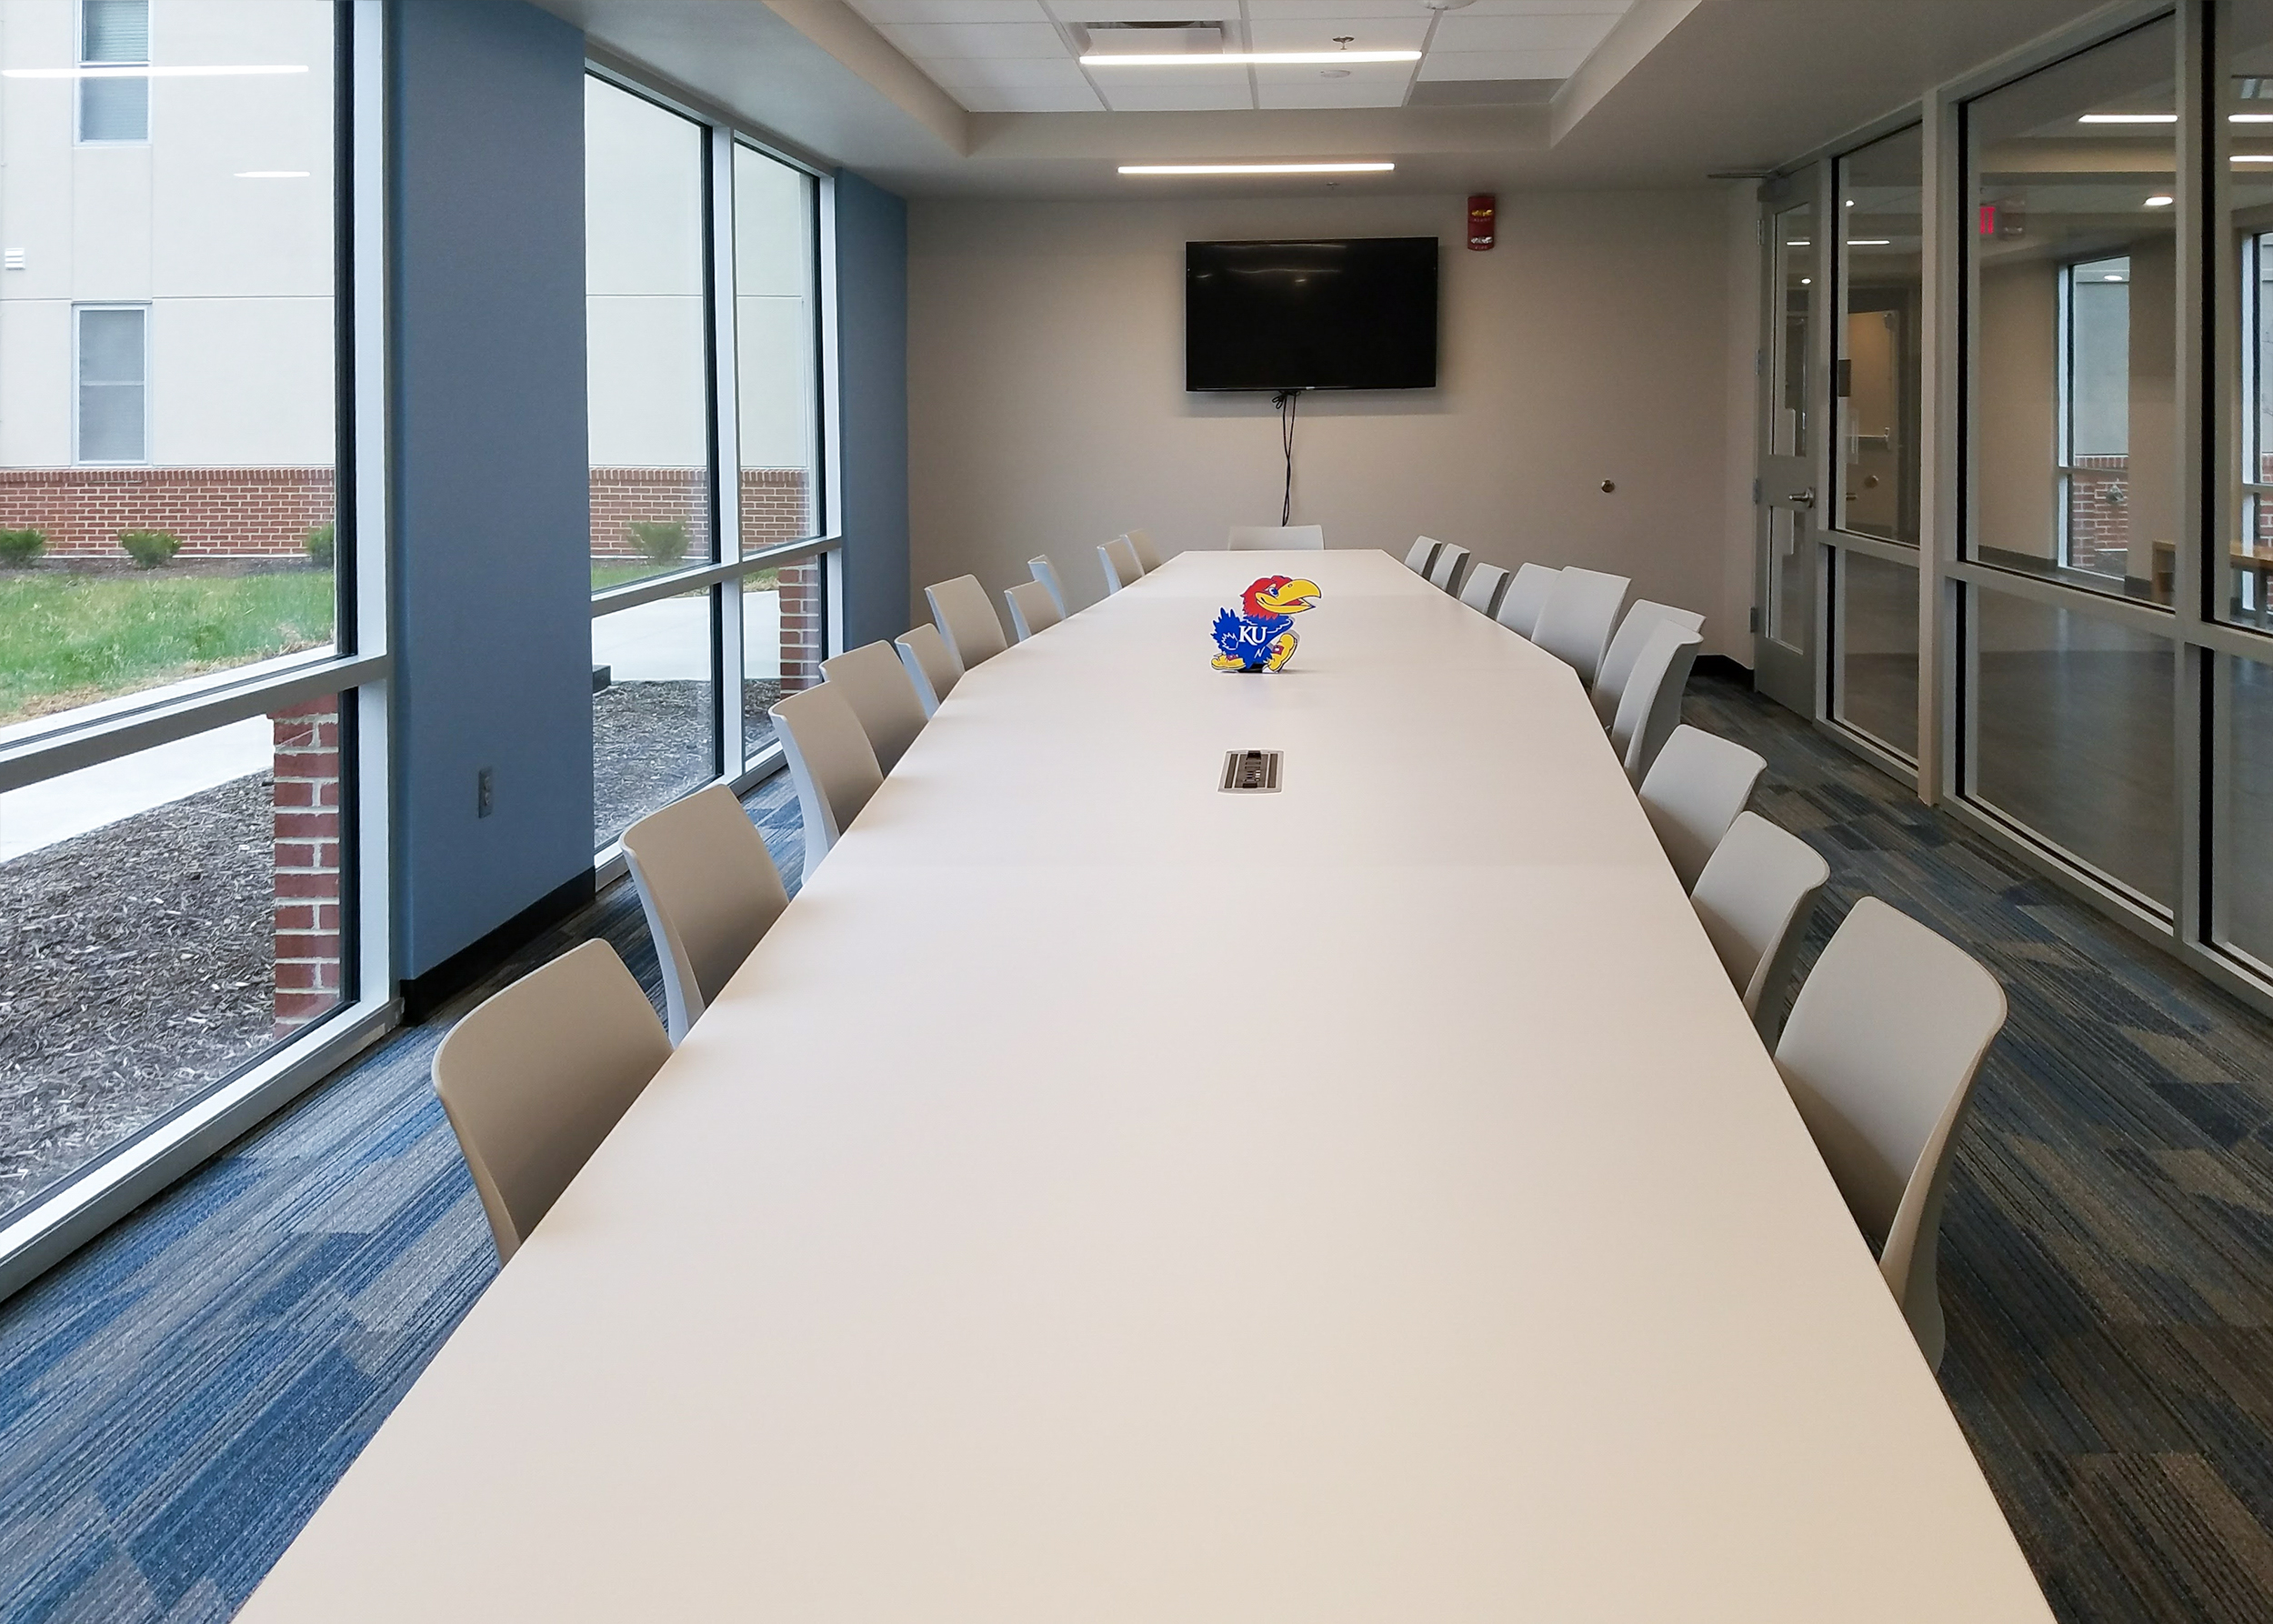 A conference table, next to a window, surrounded by office chairs on two sides.